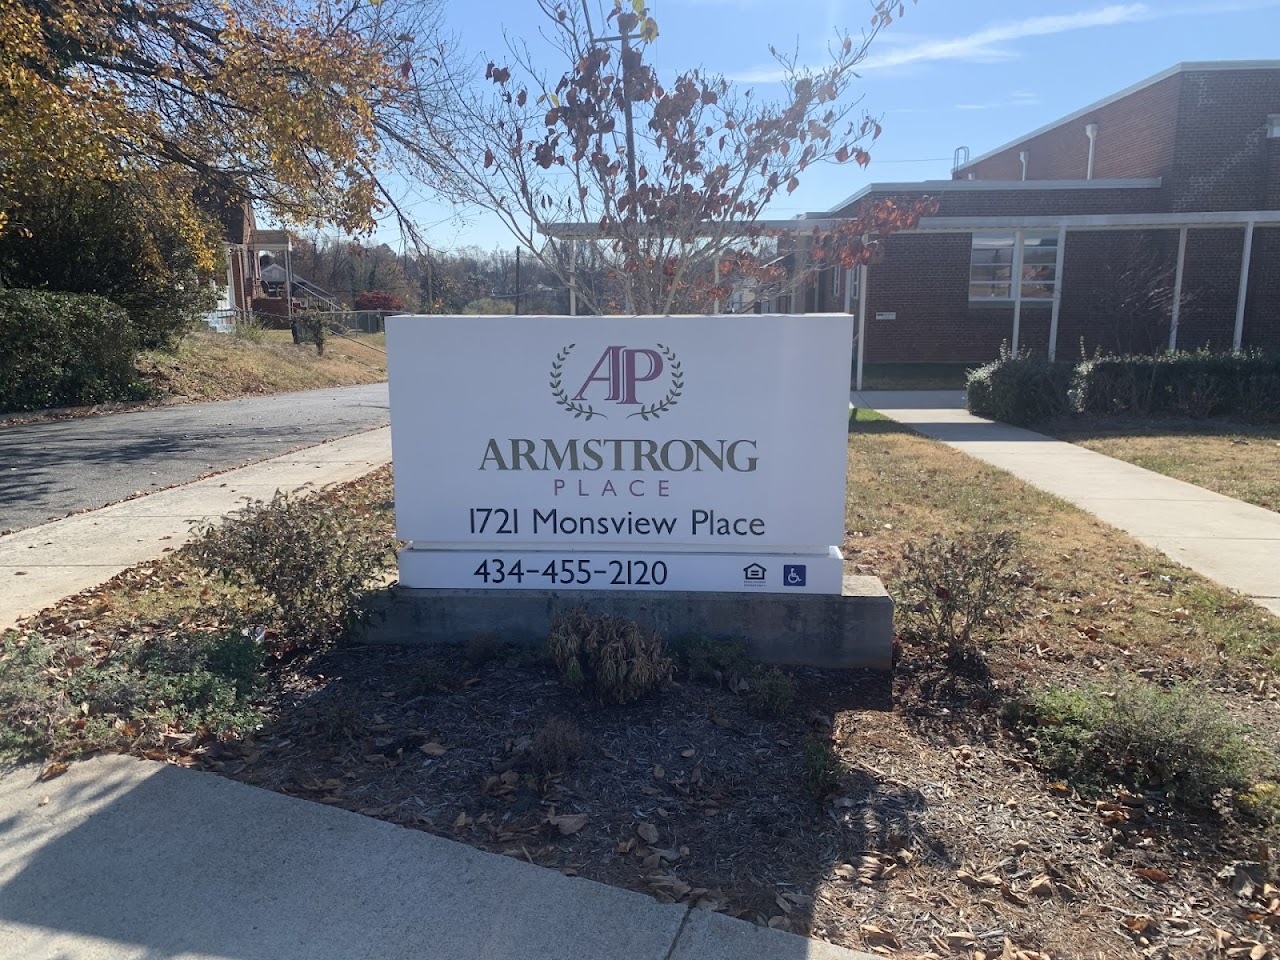 Photo of ARMSTRONG PLACE at 1721 MONSVIEW PLACE LYNCHBURG, VA 24504